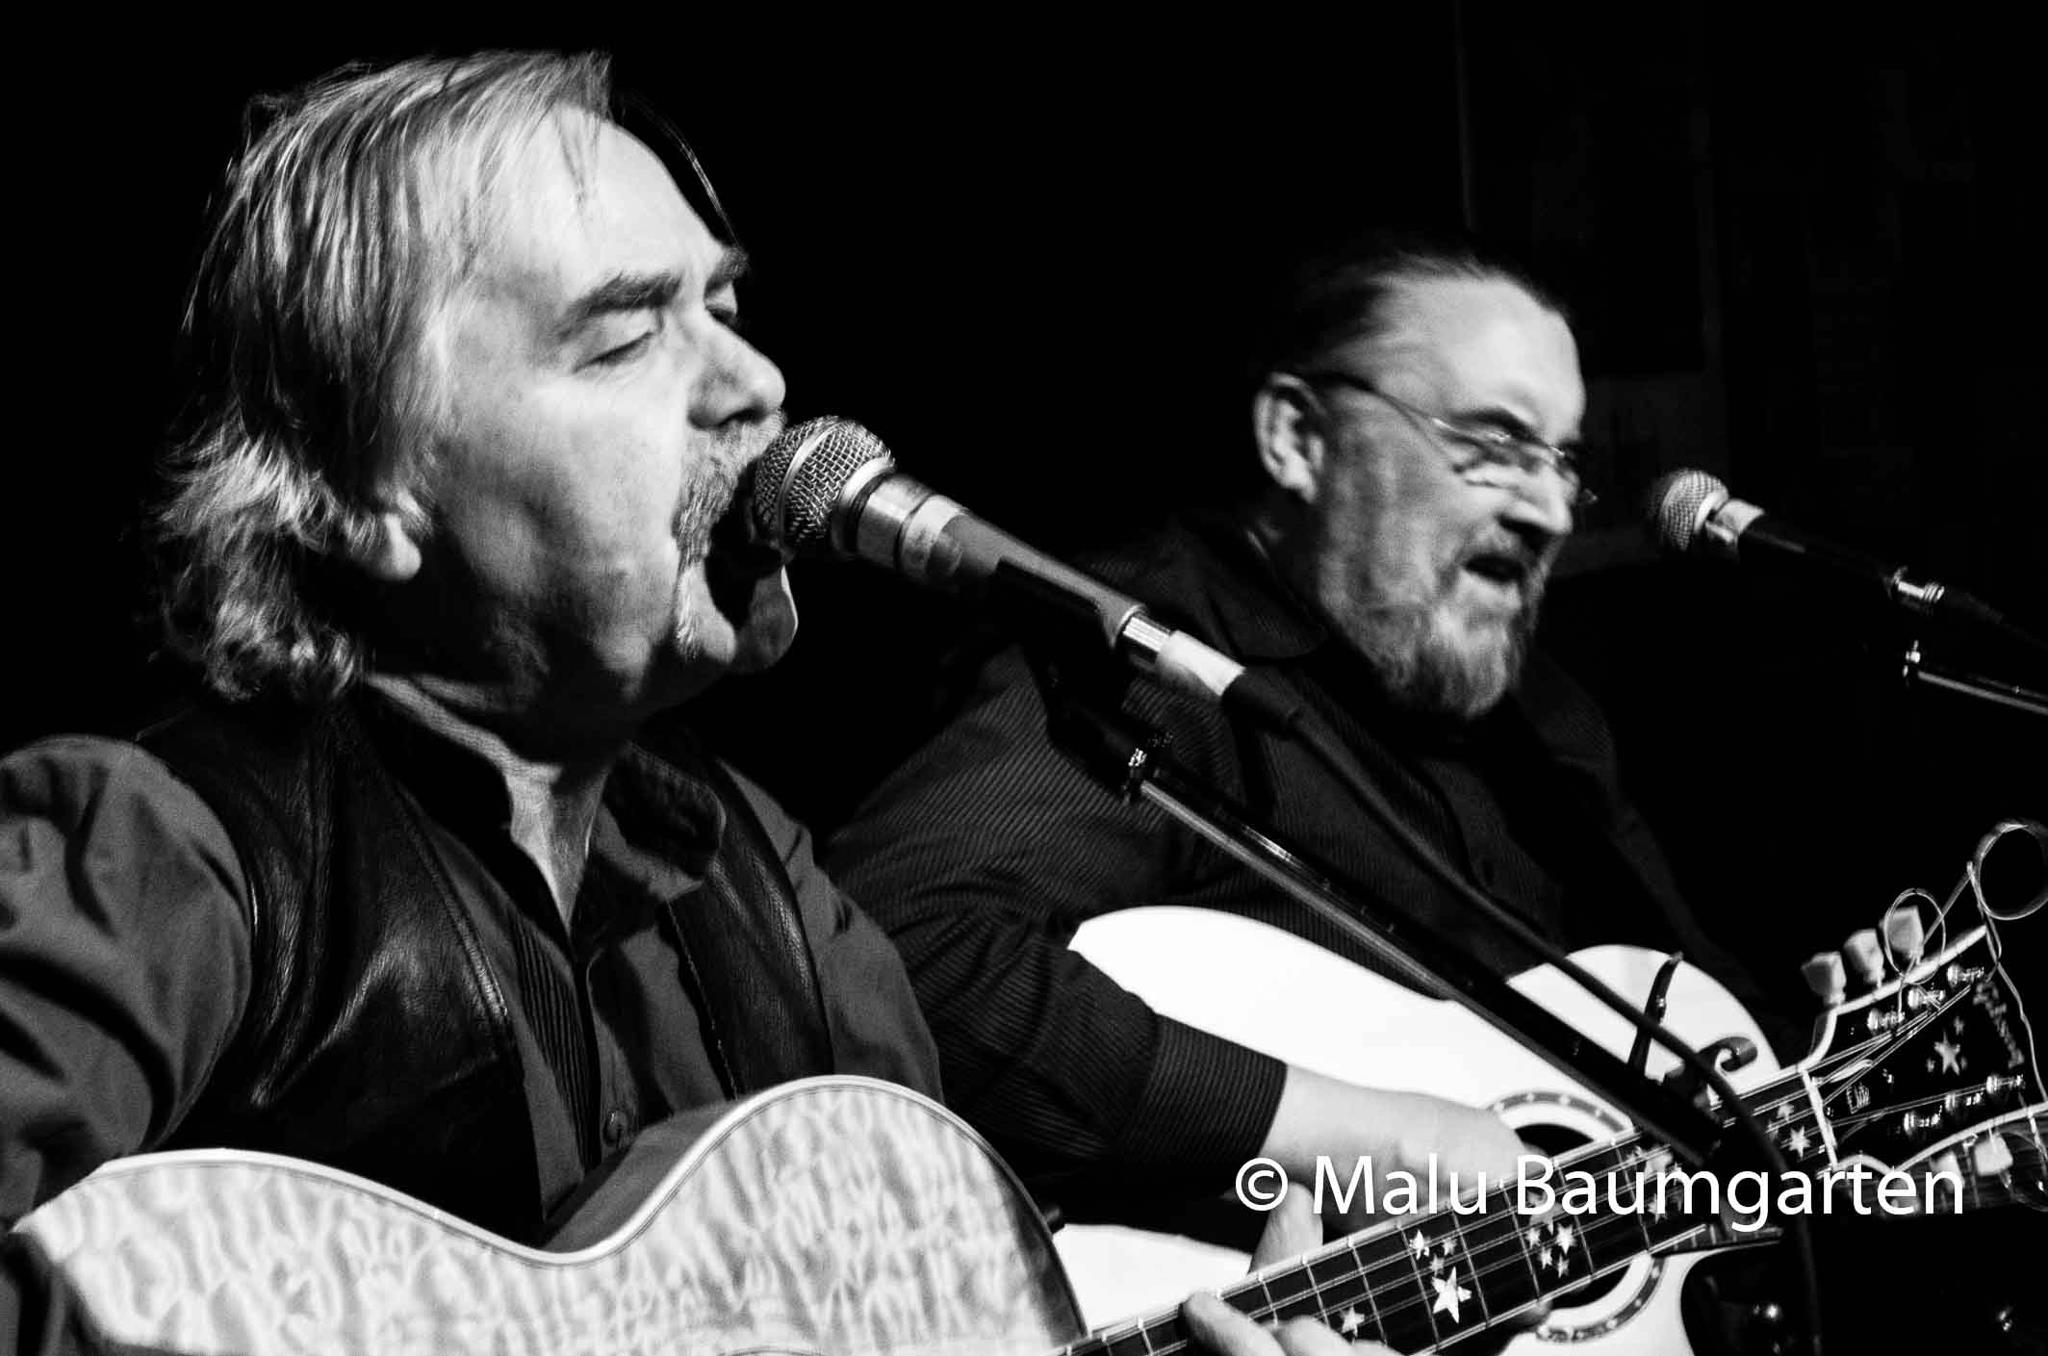 Brian Gladstone & Tony Quarrington – For A Day in the Park at Winterfolk